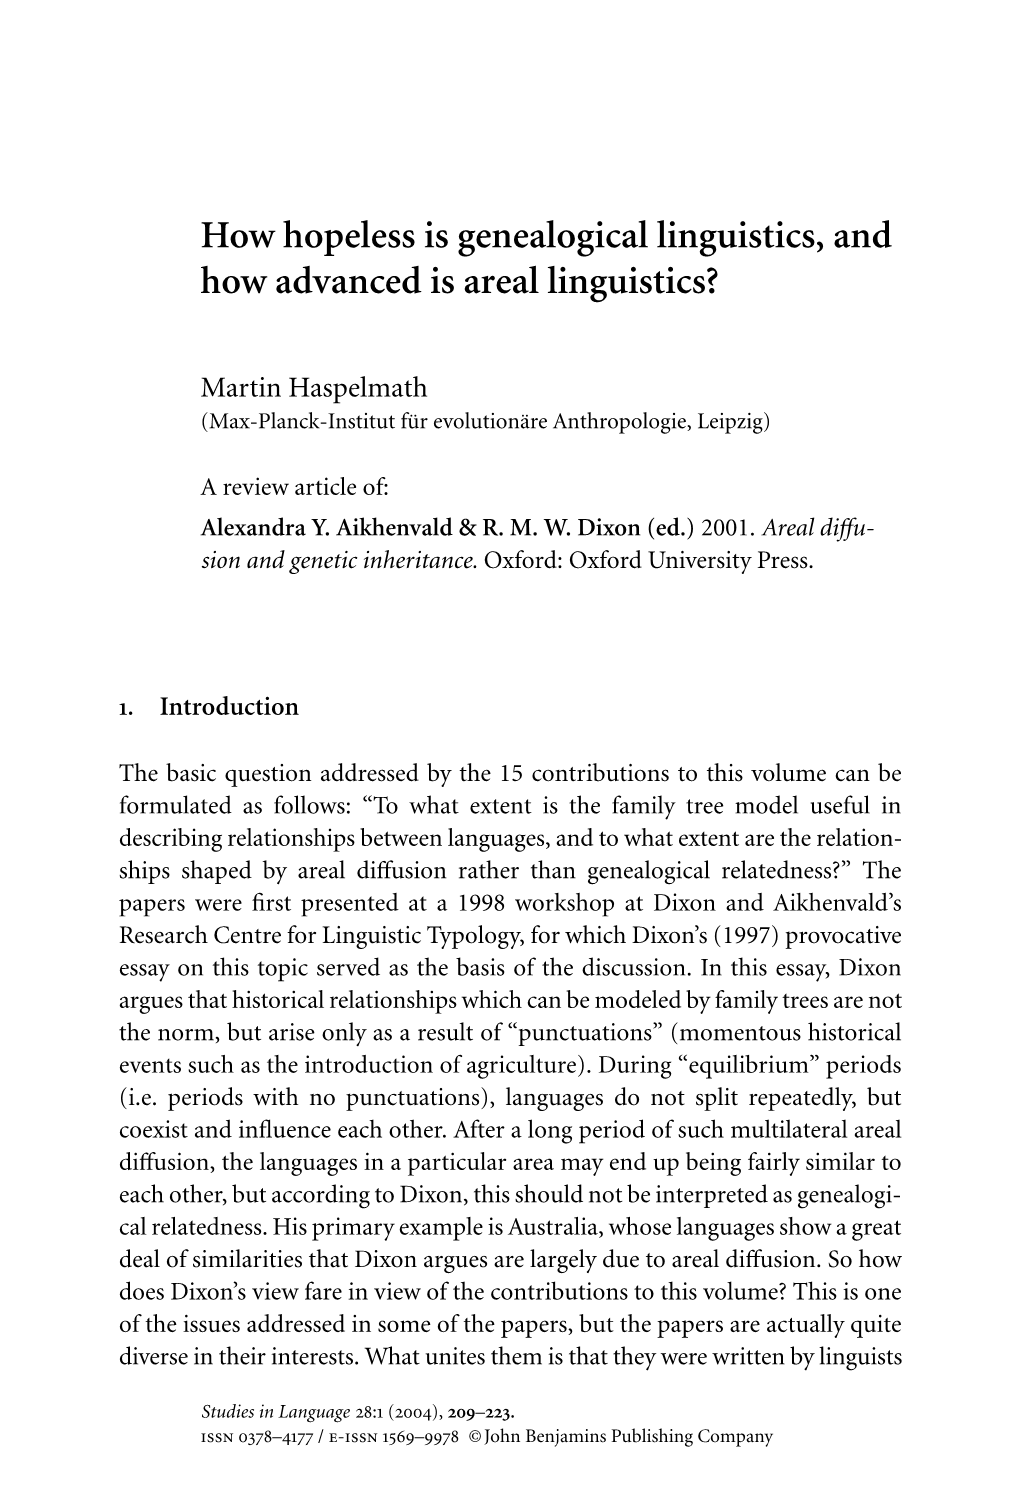 How Hopeless Is Genealogical Linguistics, and How Advanced Is Areal Linguistics?